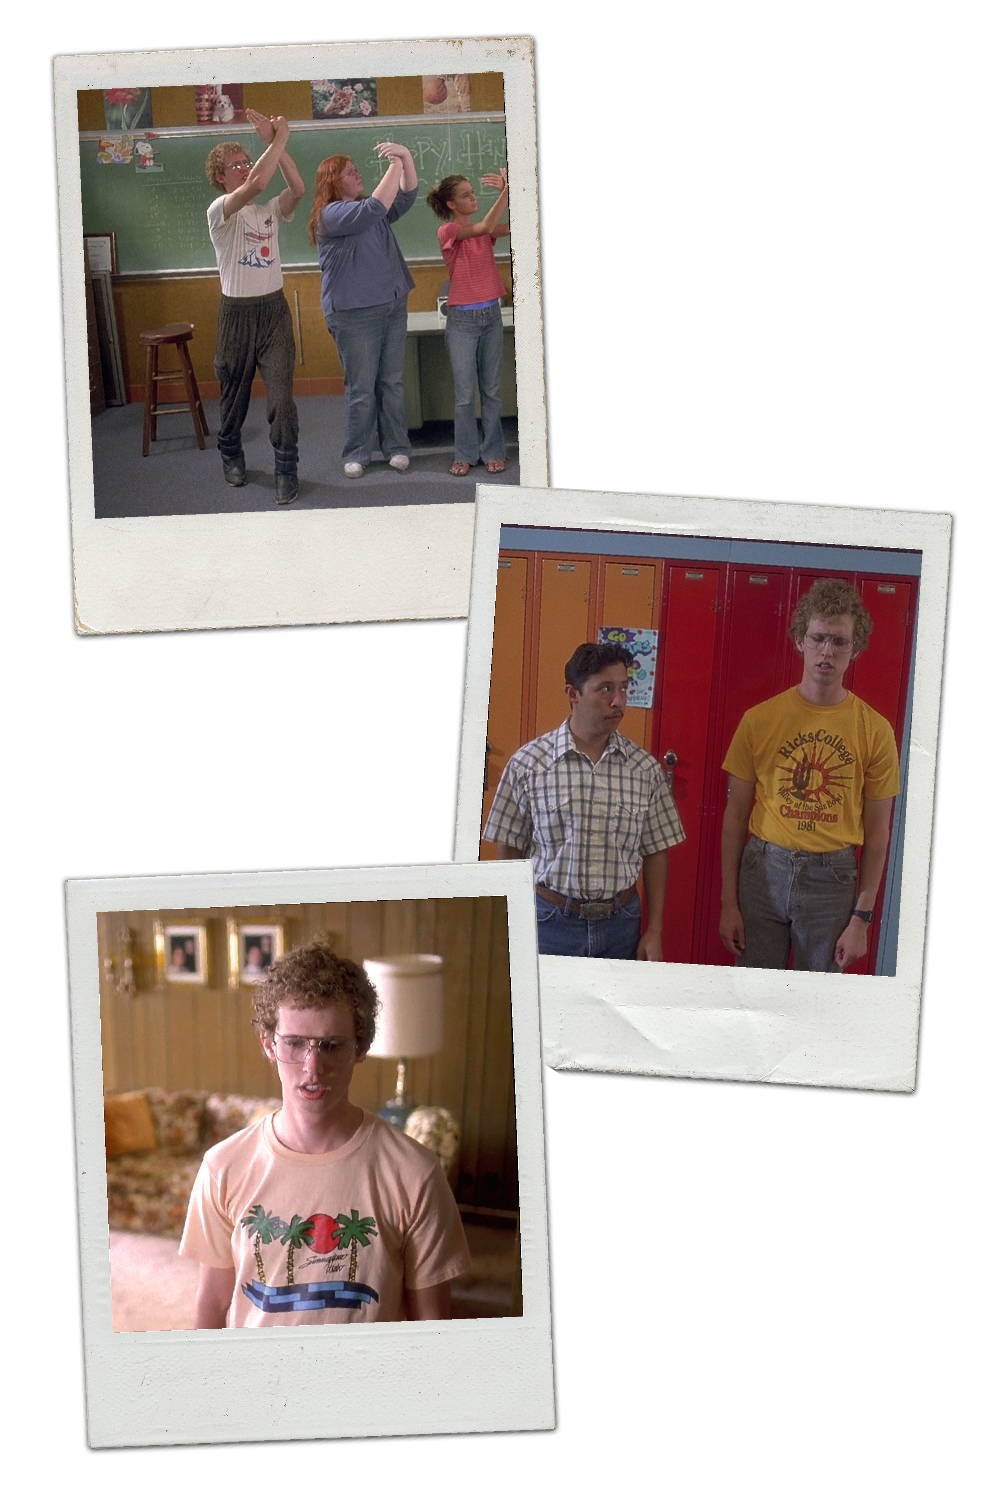 Napoleon Dynamite t shirts from the movie